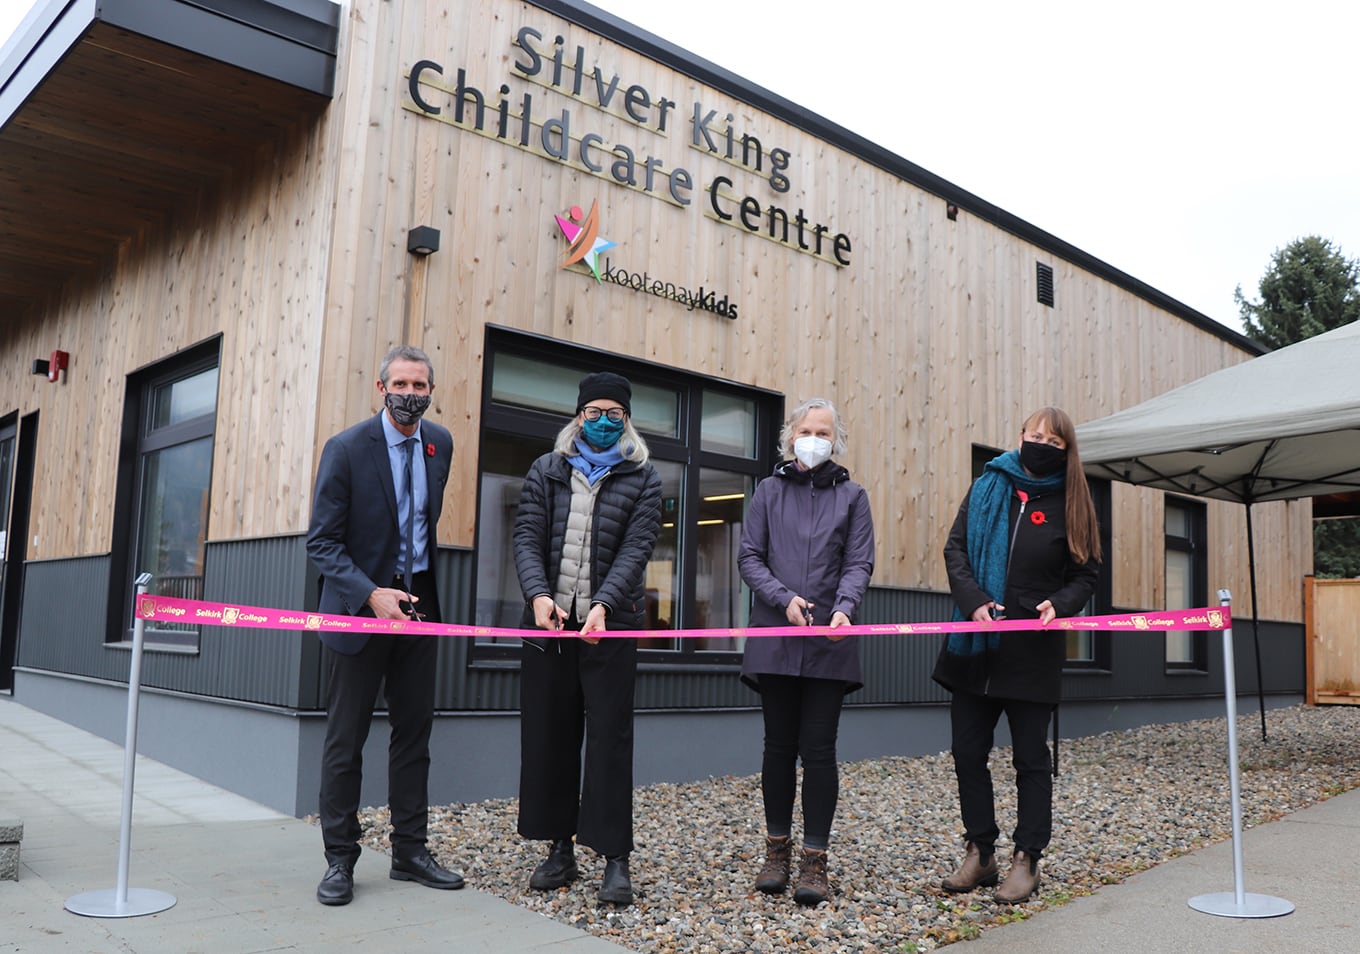 New childcare centre opens at Selkirk College Silver King Campus